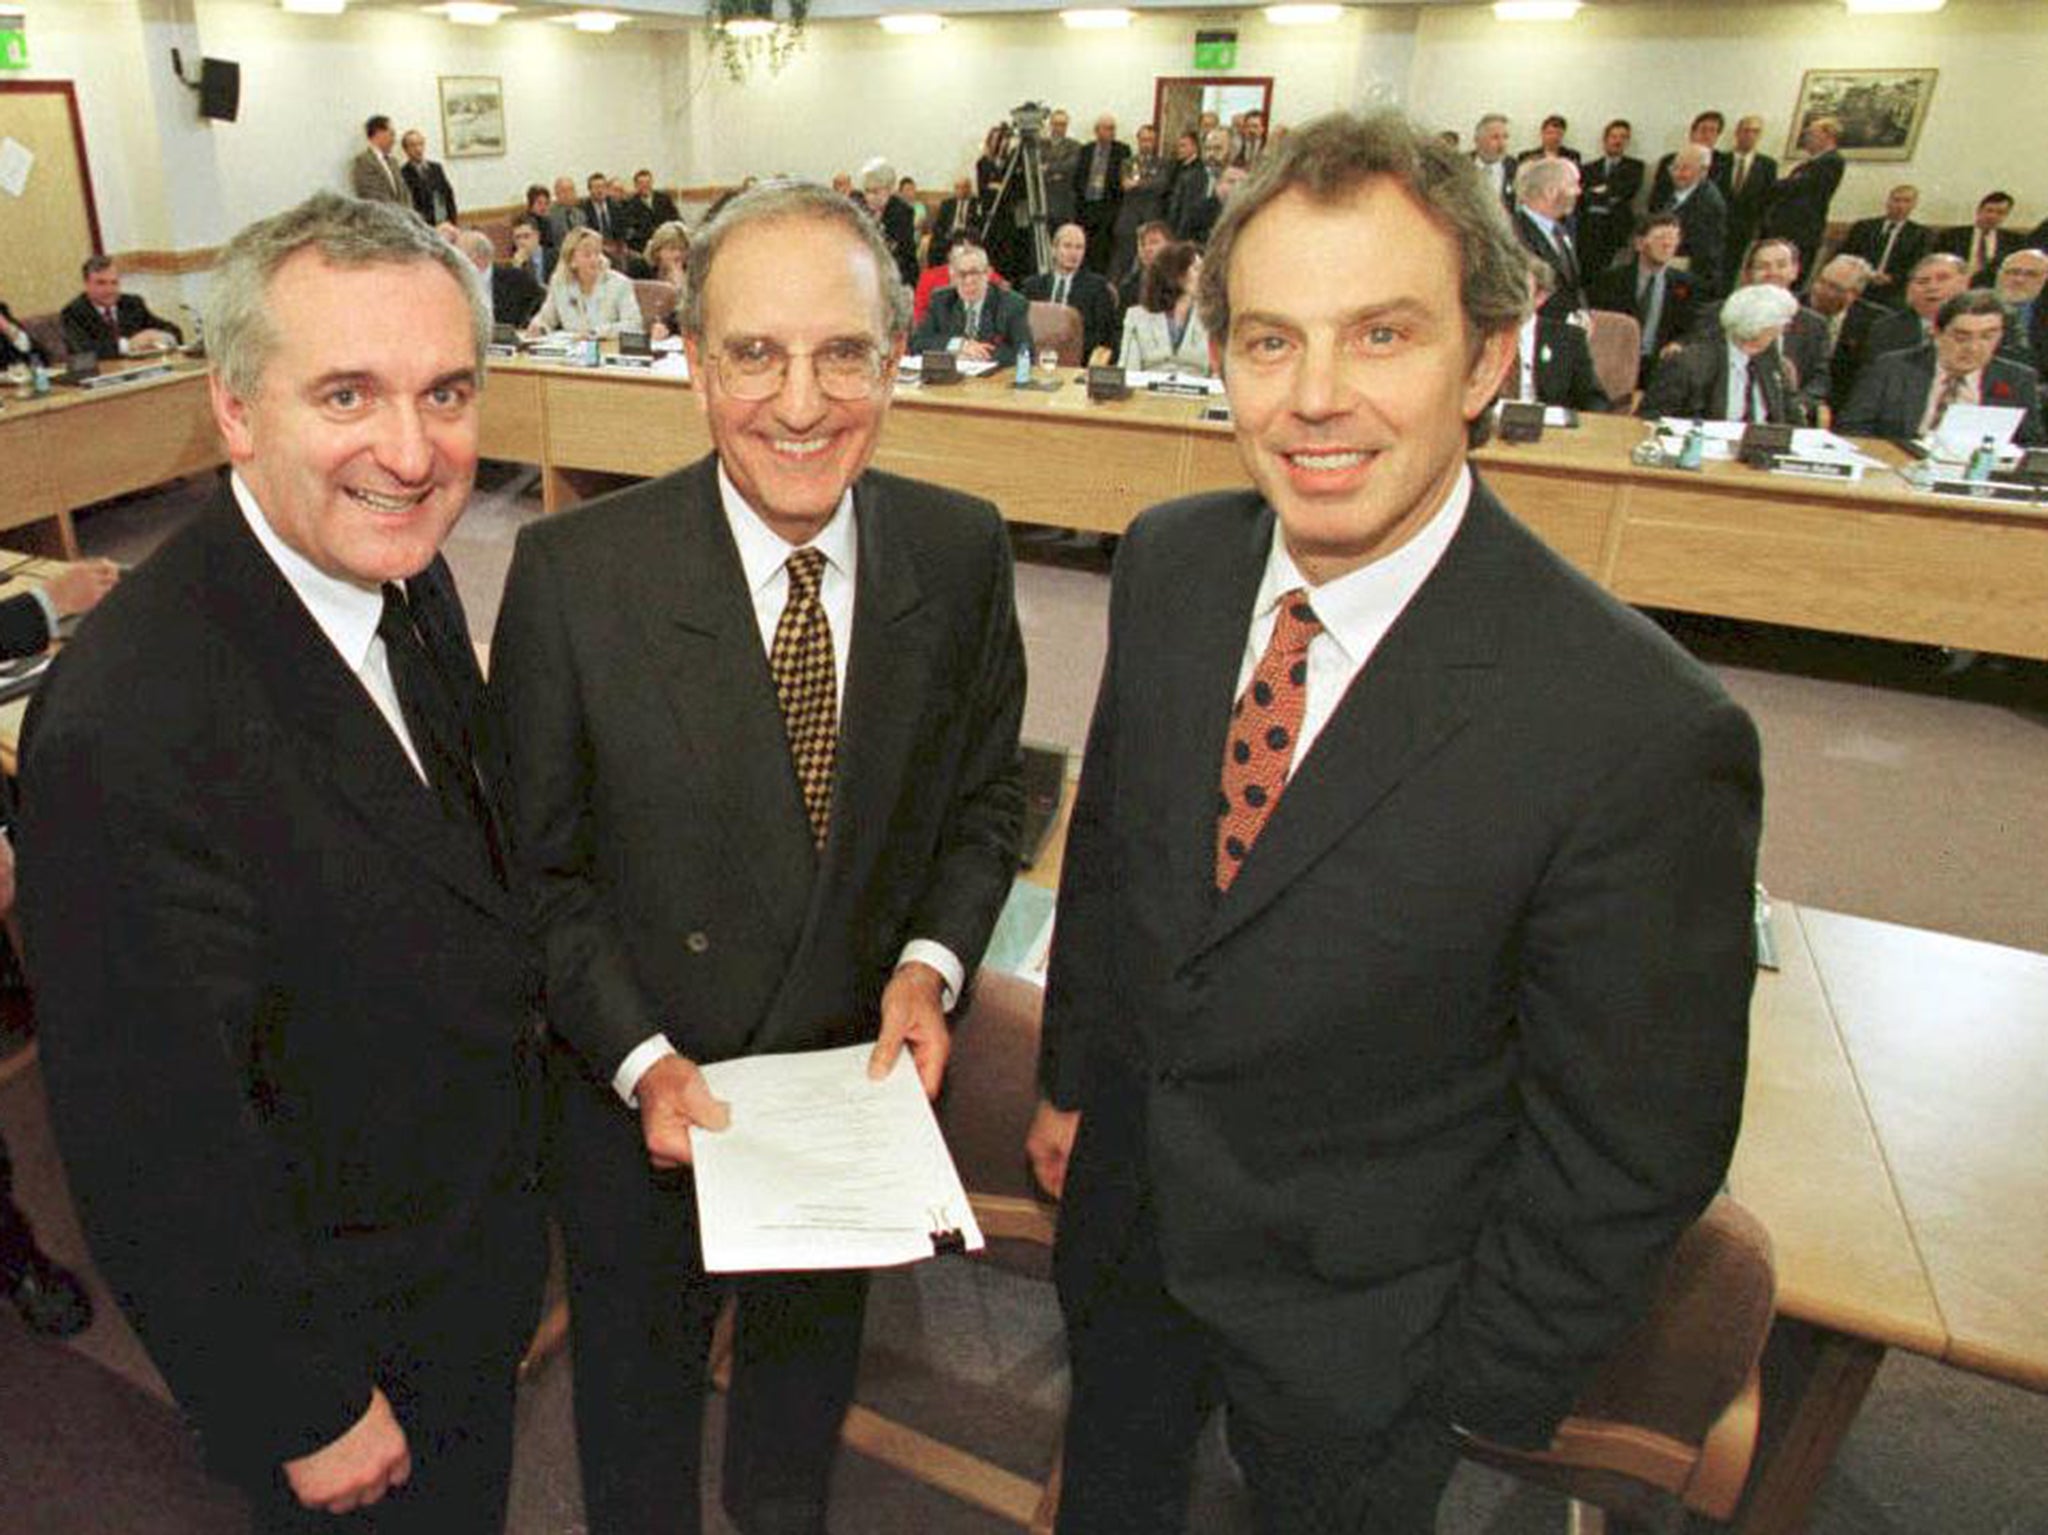 From left: Irish prime minister Bertie Ahern, US senator George Mitchell and British PM Tony Blair sign the Good Friday Agreement in 1998